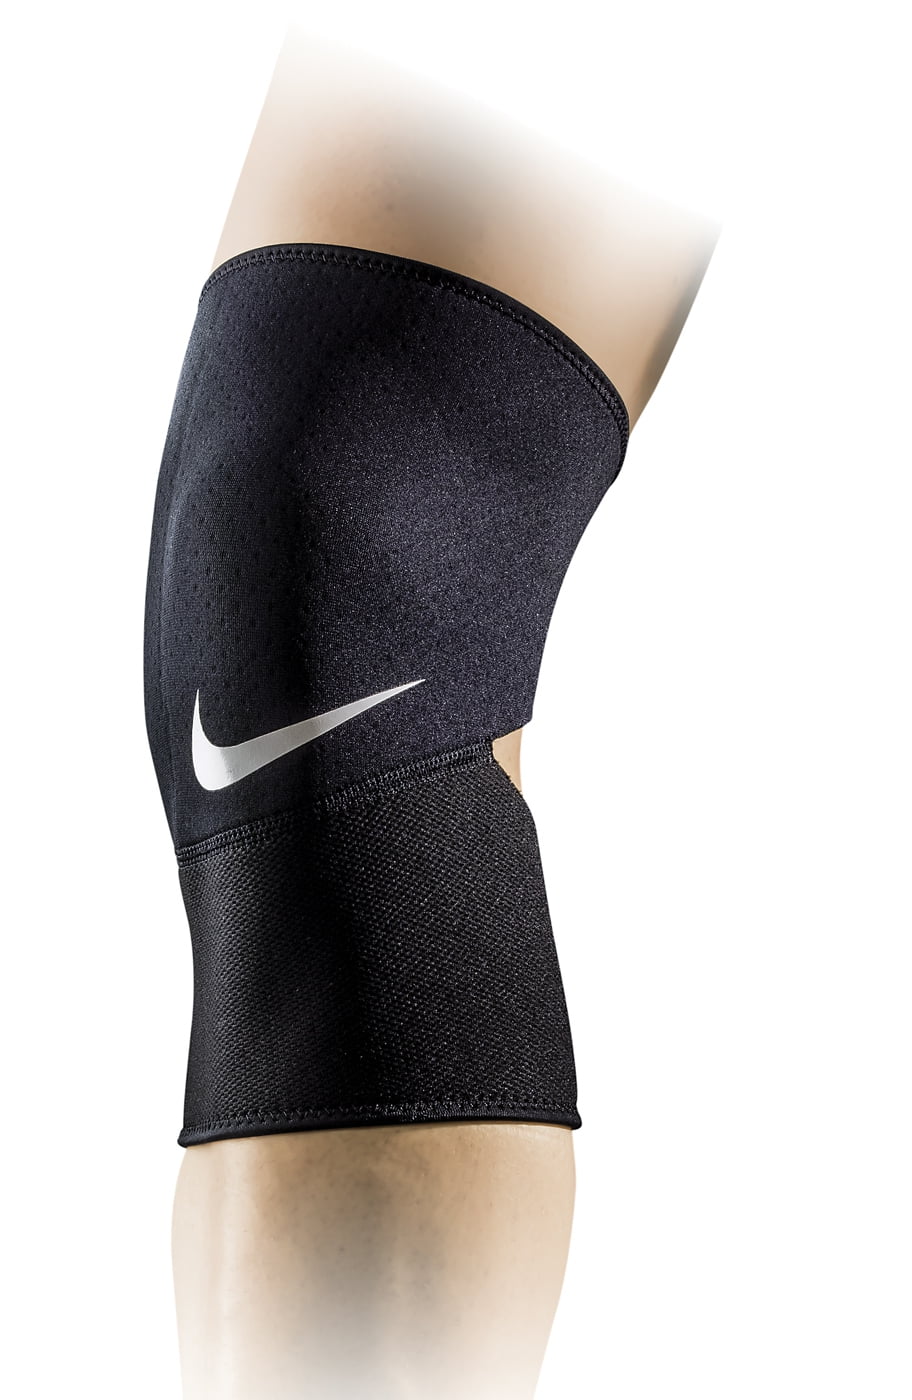 nike pro closed knee support